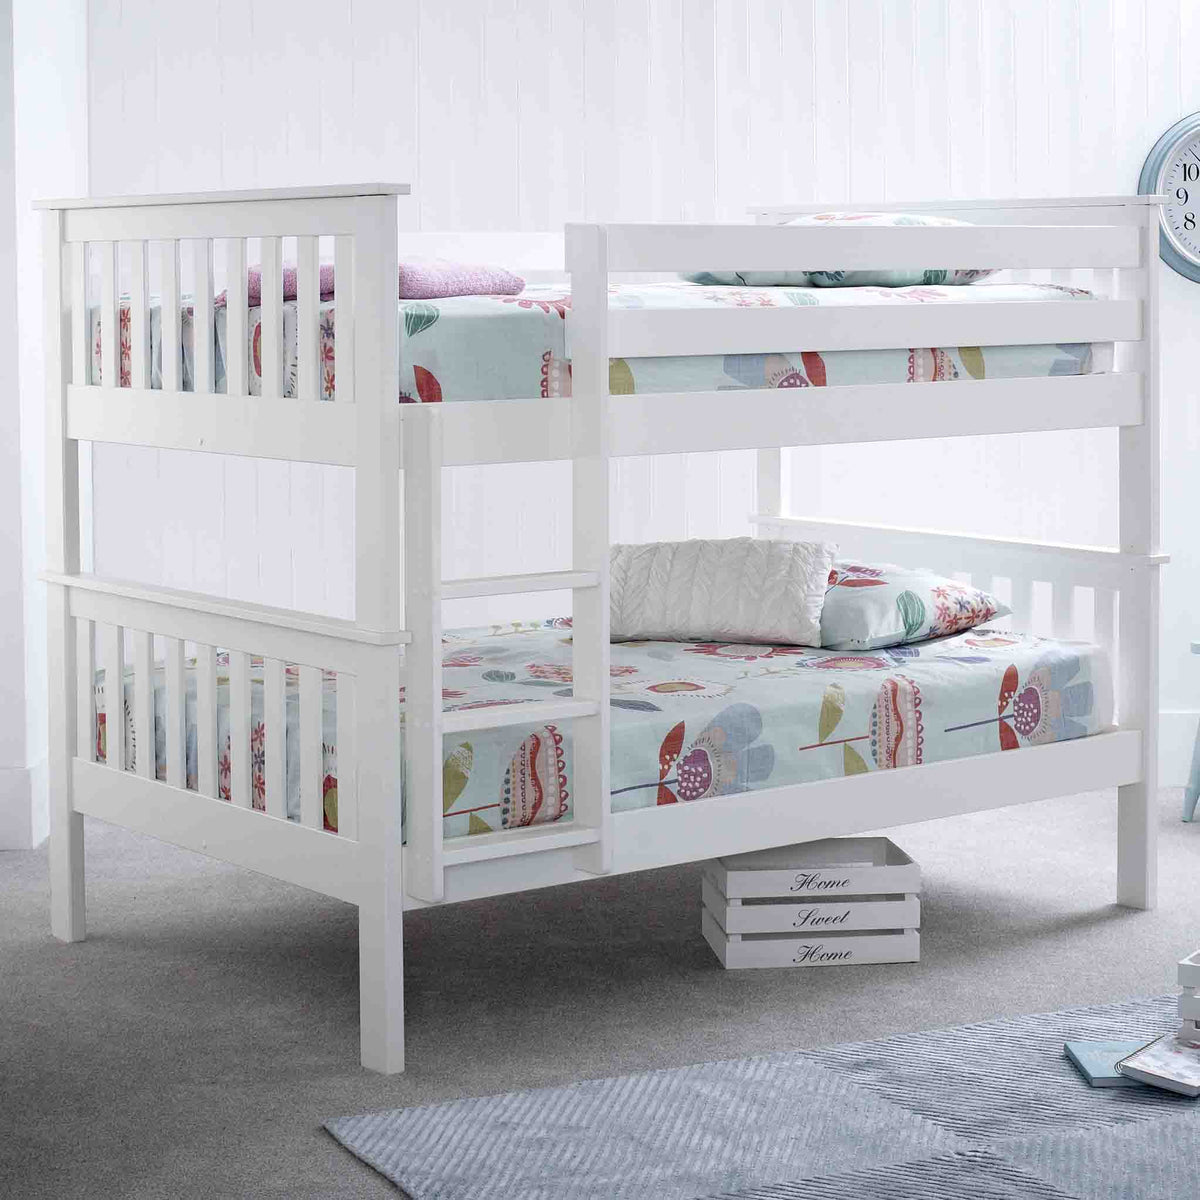 lifestyle image of the Quad 4 Sleeper Small Double Bunk Bed